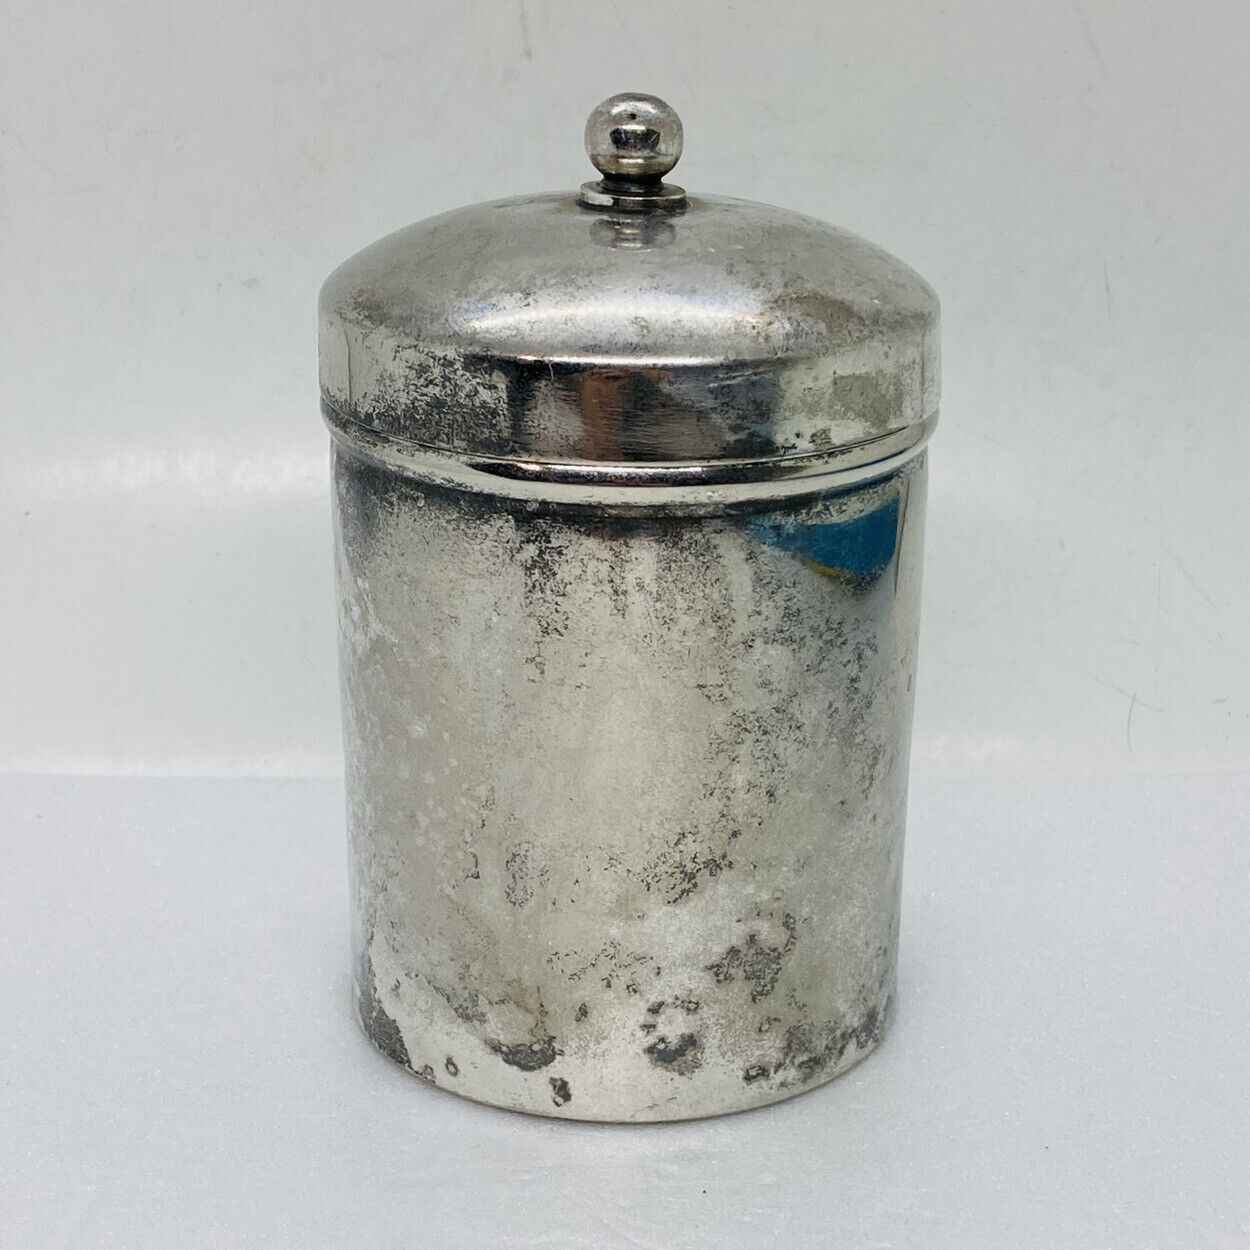 Vintage Silverplated Lidded Container 4.75” Tall Patina Look Art Decor 21